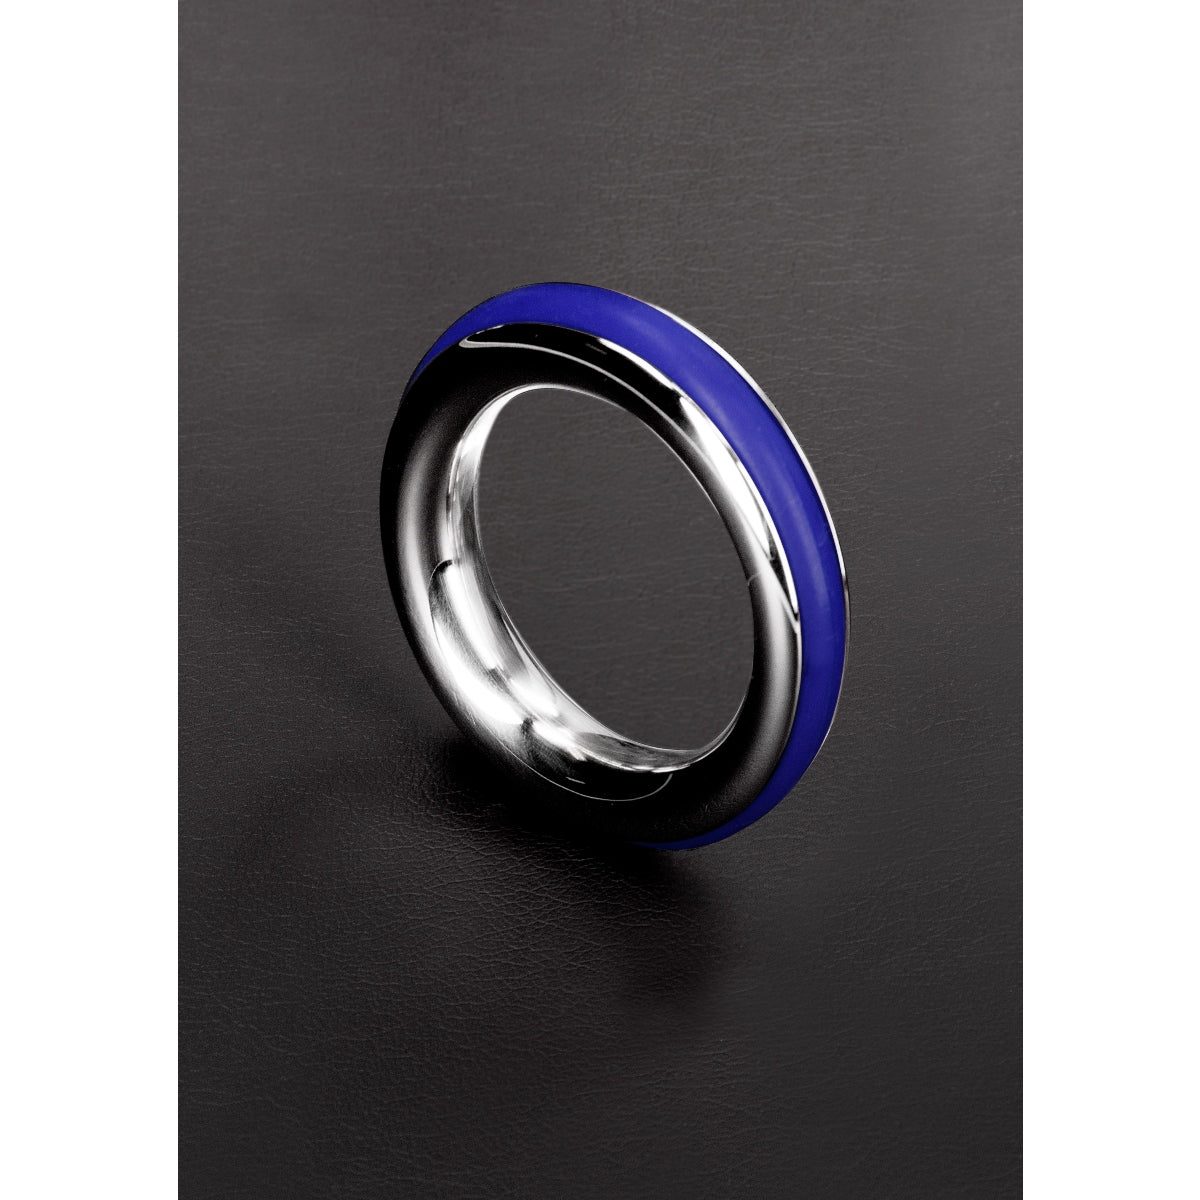 Shots Steel Cazzo Tensions Stainless Steel Cock Ring Blue 1.6 Inch